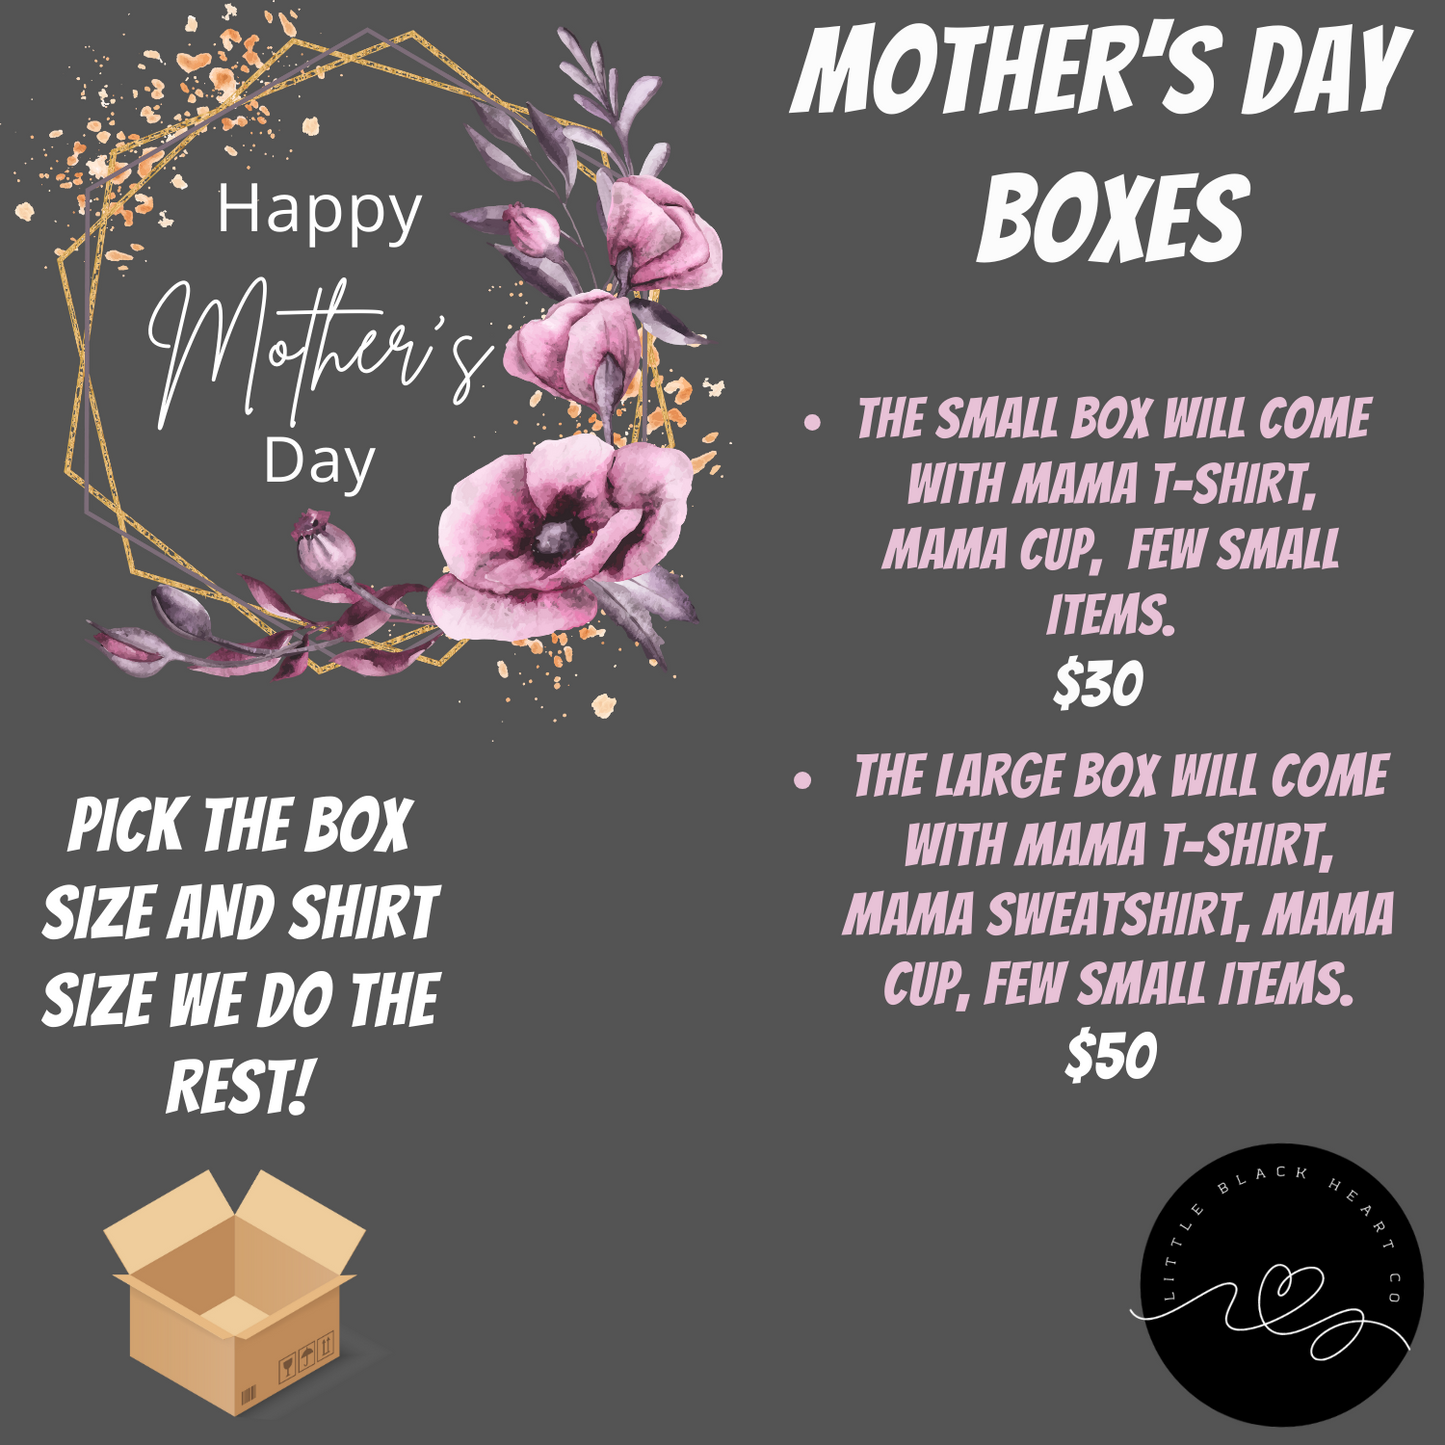 MOTHER'S DAY BOXES